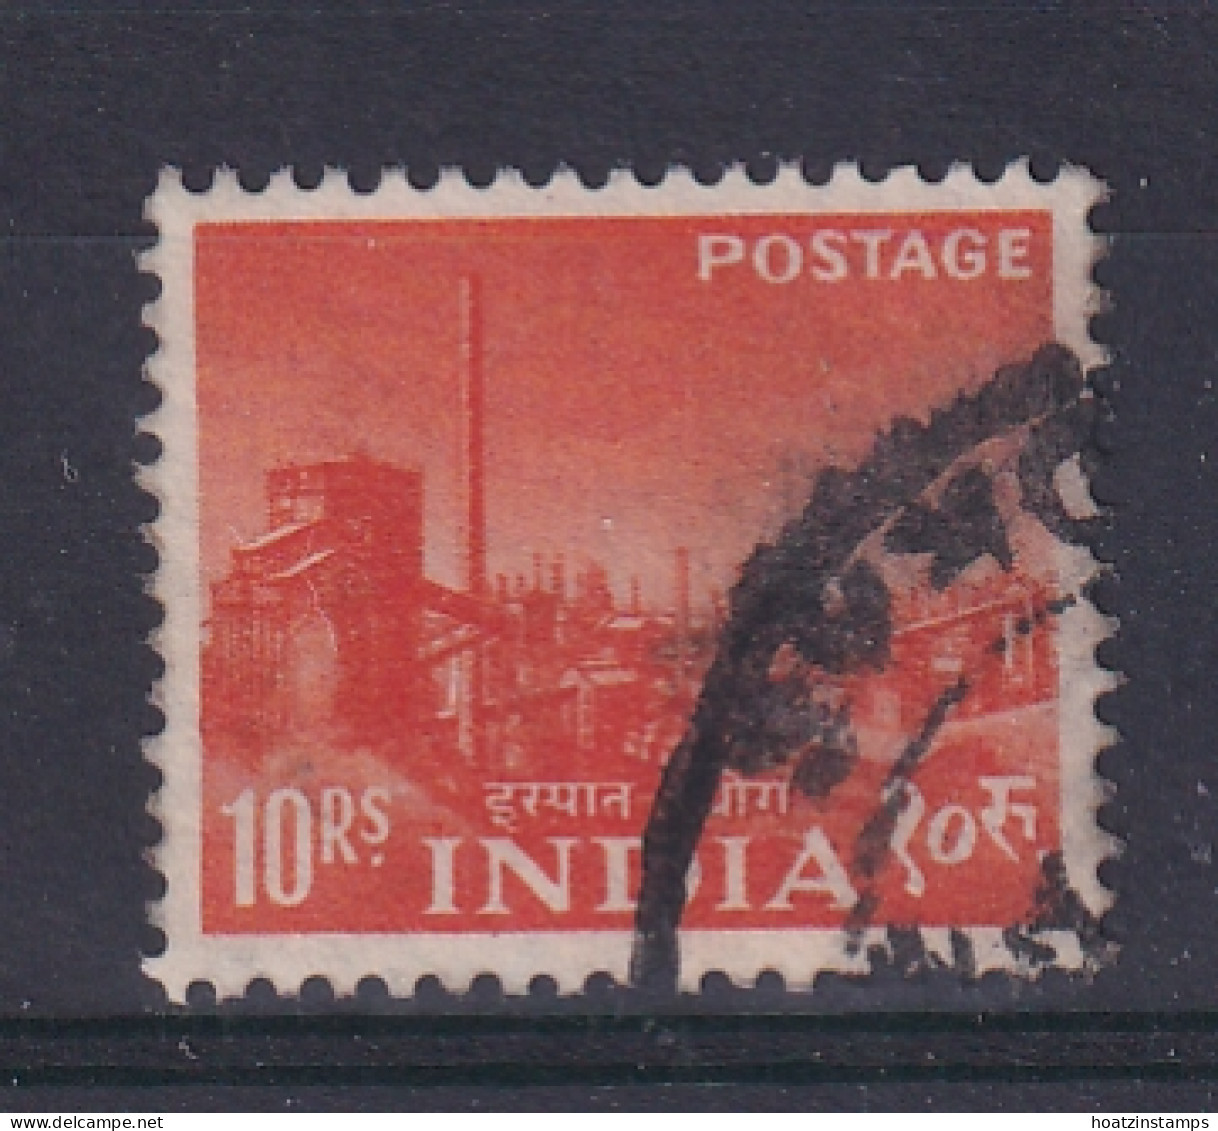 India: 1955   Five Year Plan    SG371     10R     Used - Used Stamps